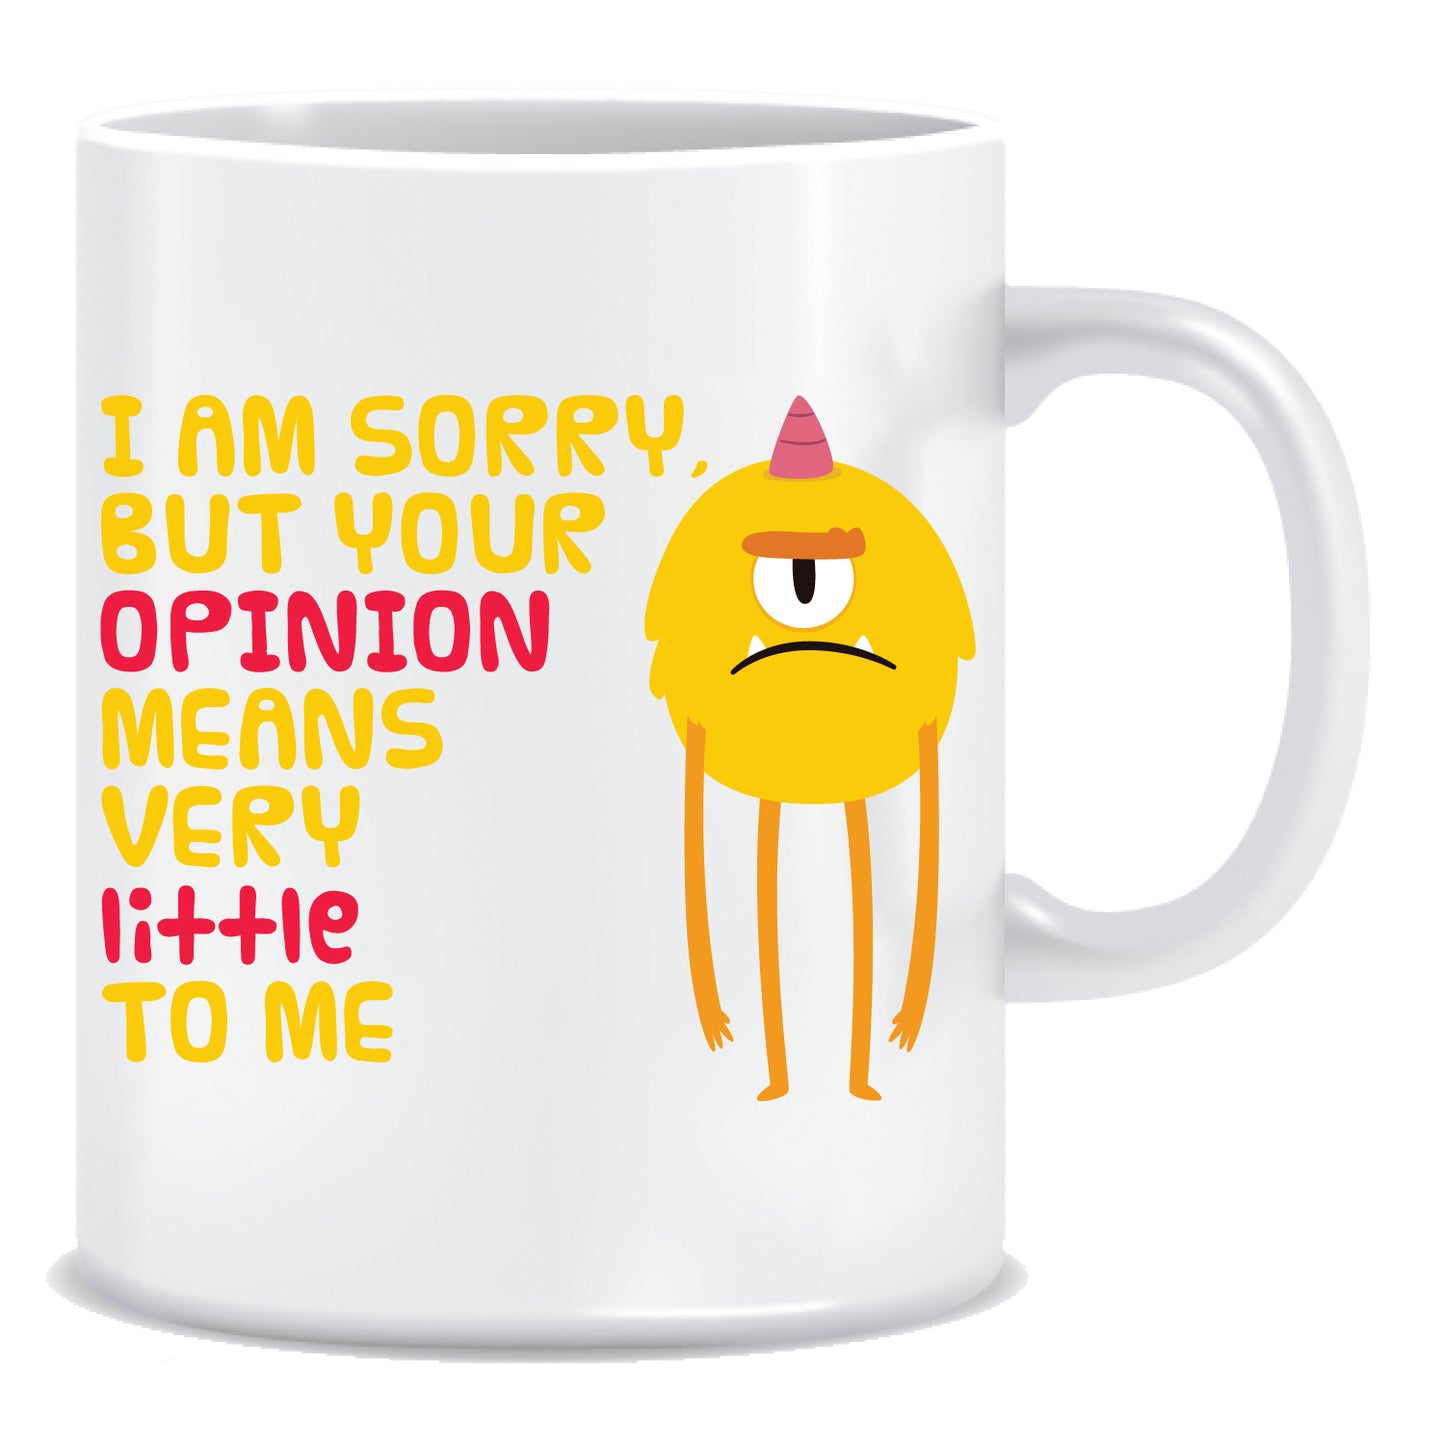 I Am Sorry But Your Opinion Means Very Little to Me Ceramic Coffee Mug -ED1347